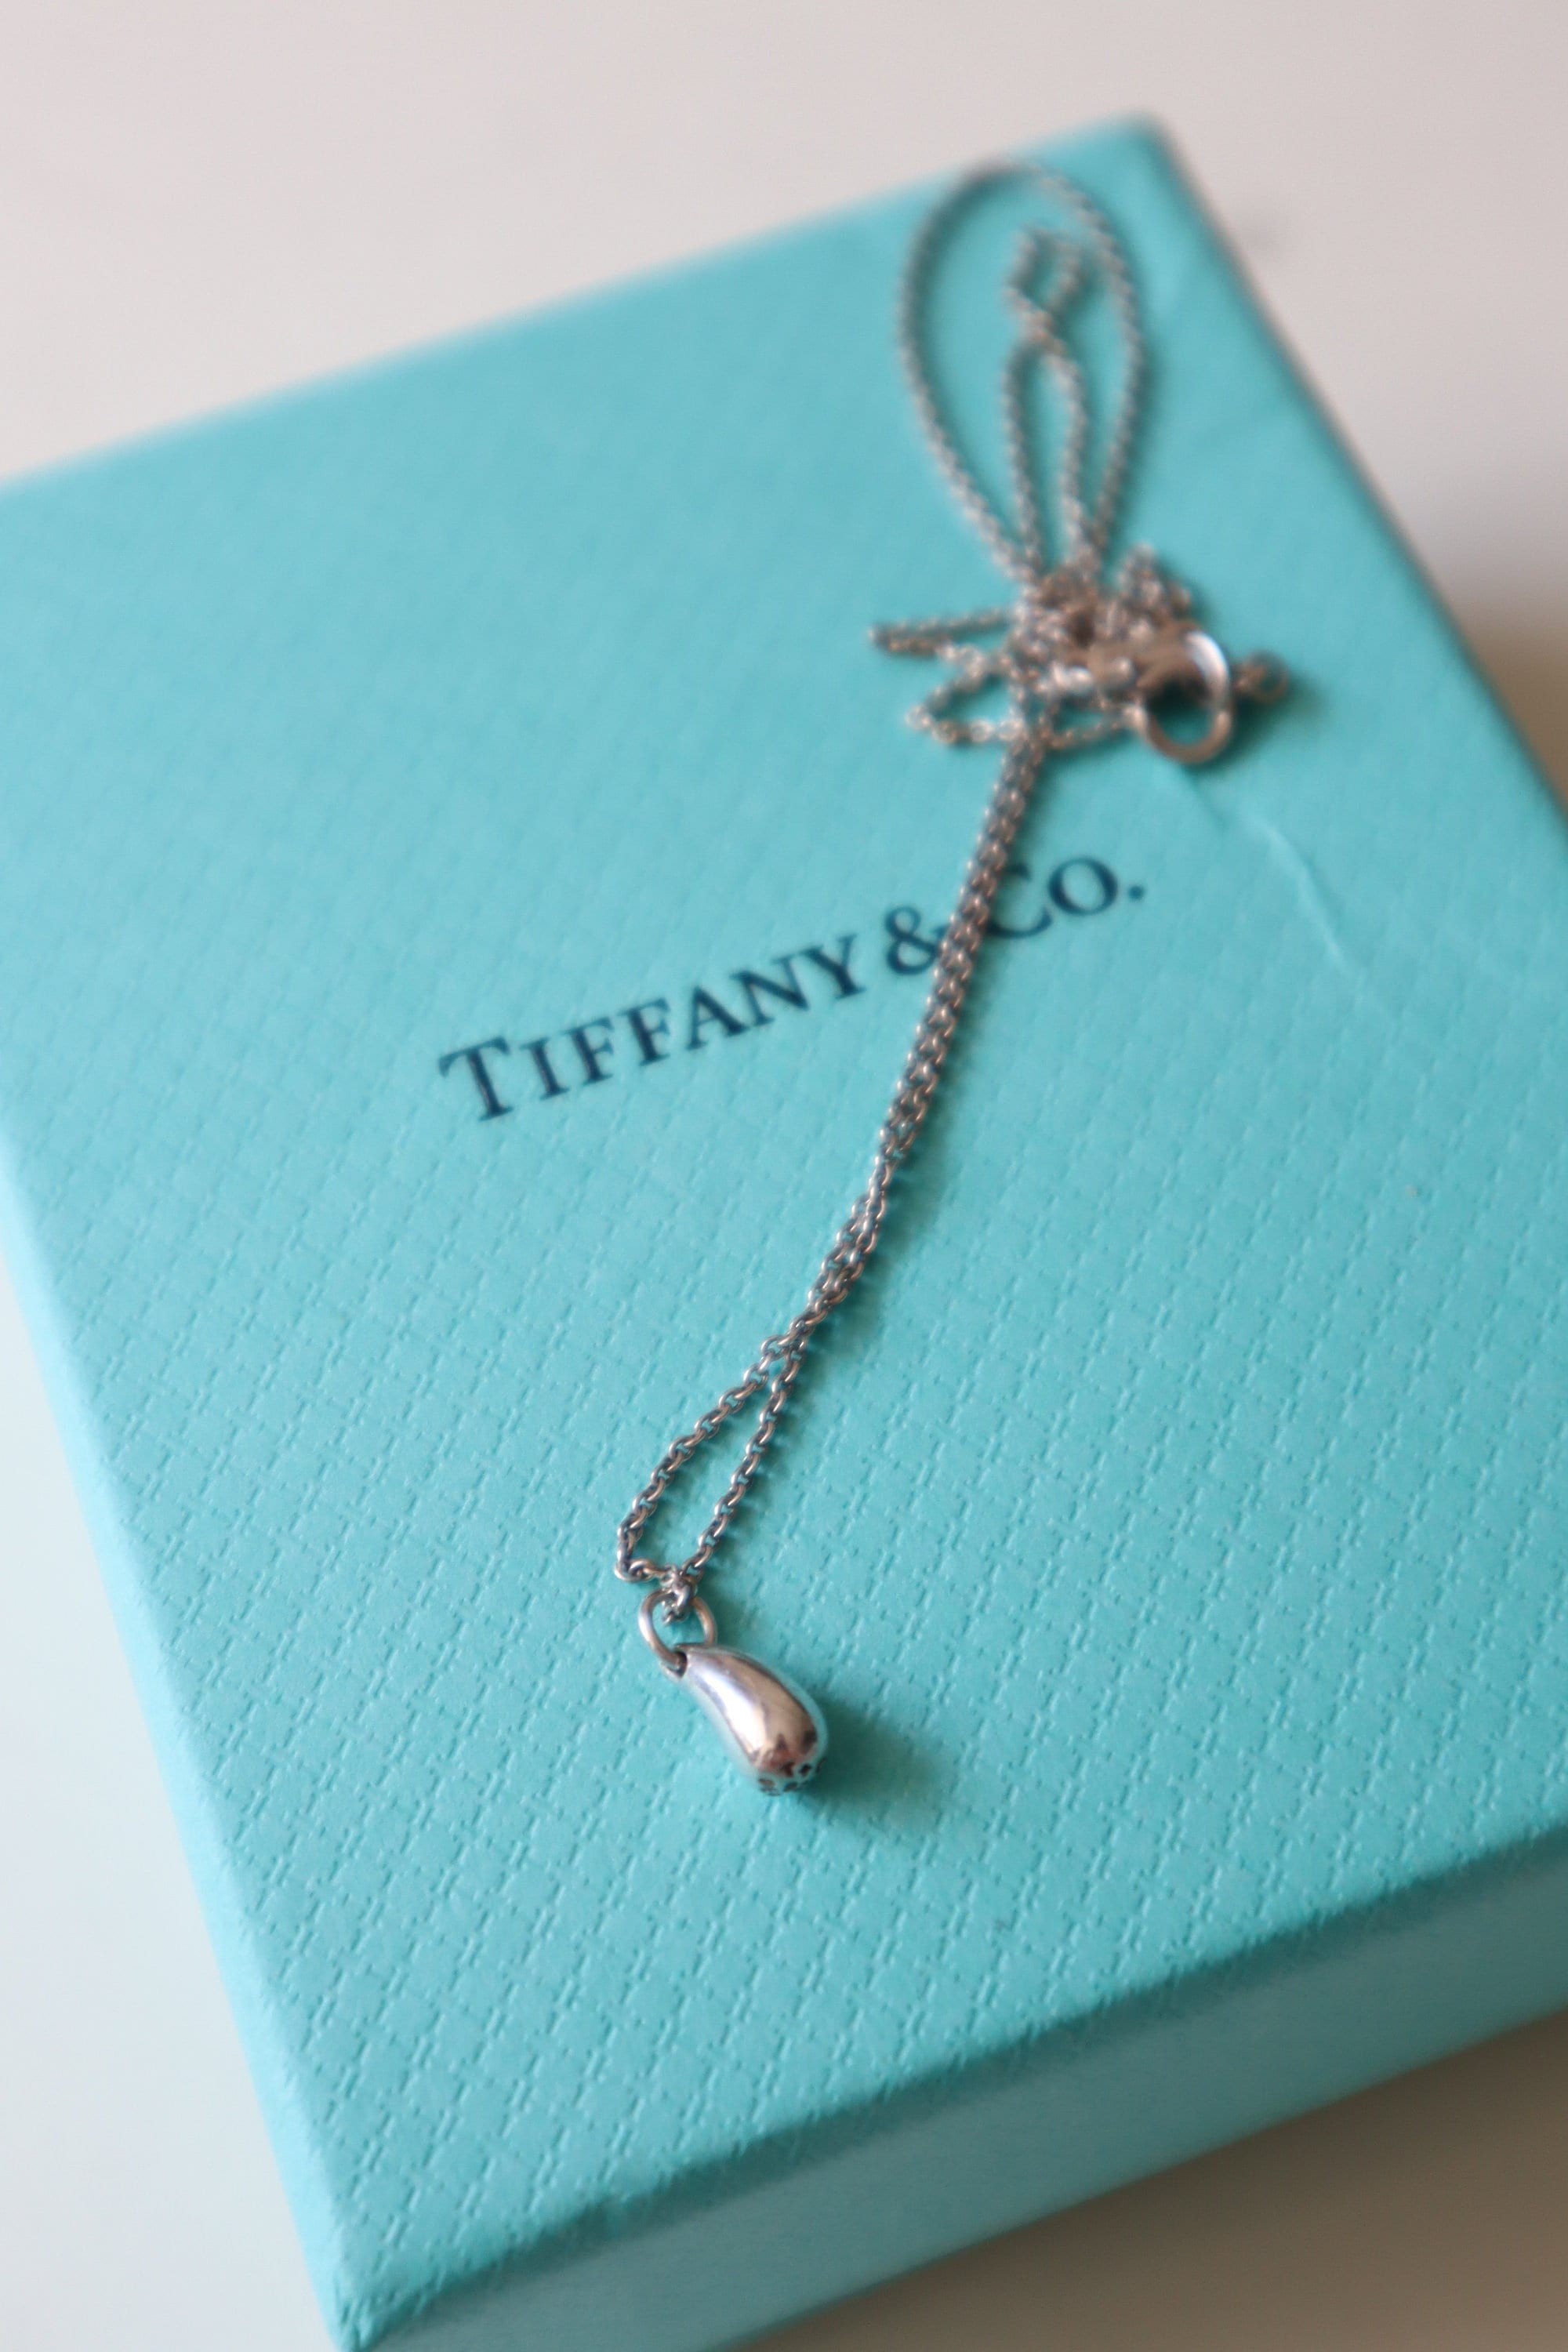 tiffany and co aesthetic